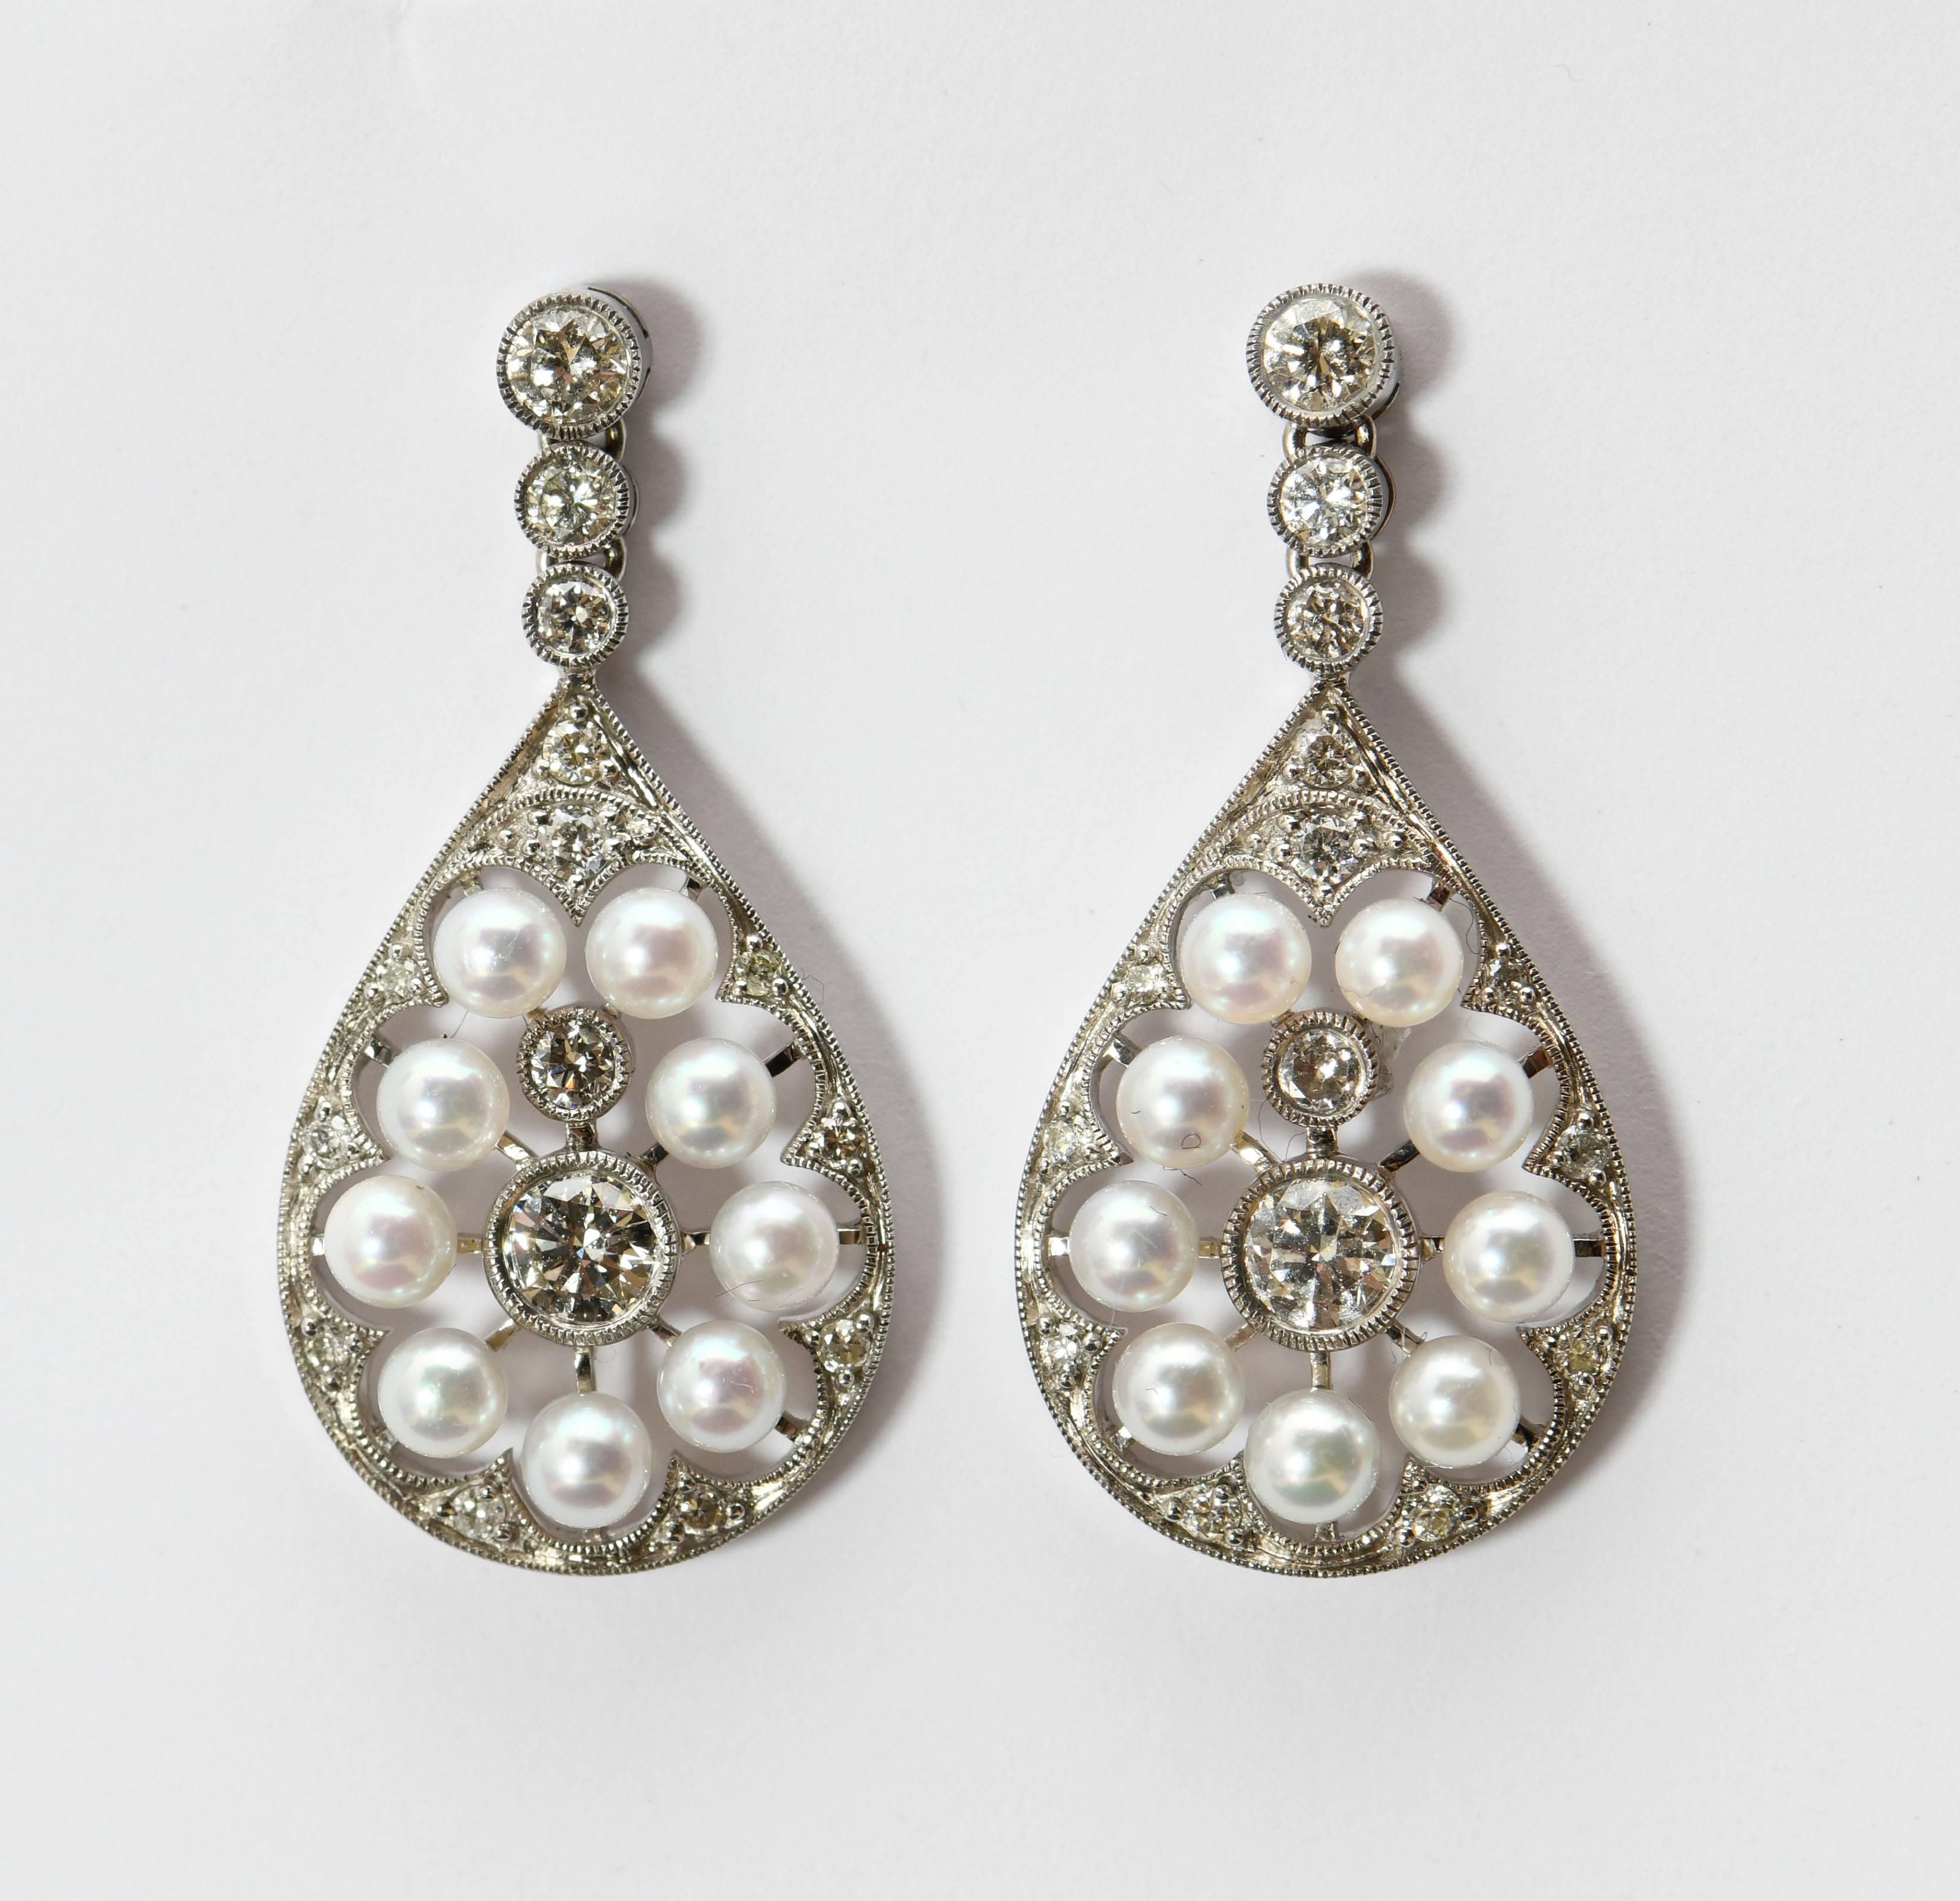 These are earrings of elegant, understated beauty. The Edwardian design is in a classic water drop shape suspended below three diamonds. The pearls set on bars radiating from the central diamond are reminiscent of a snowflake. The borders and the